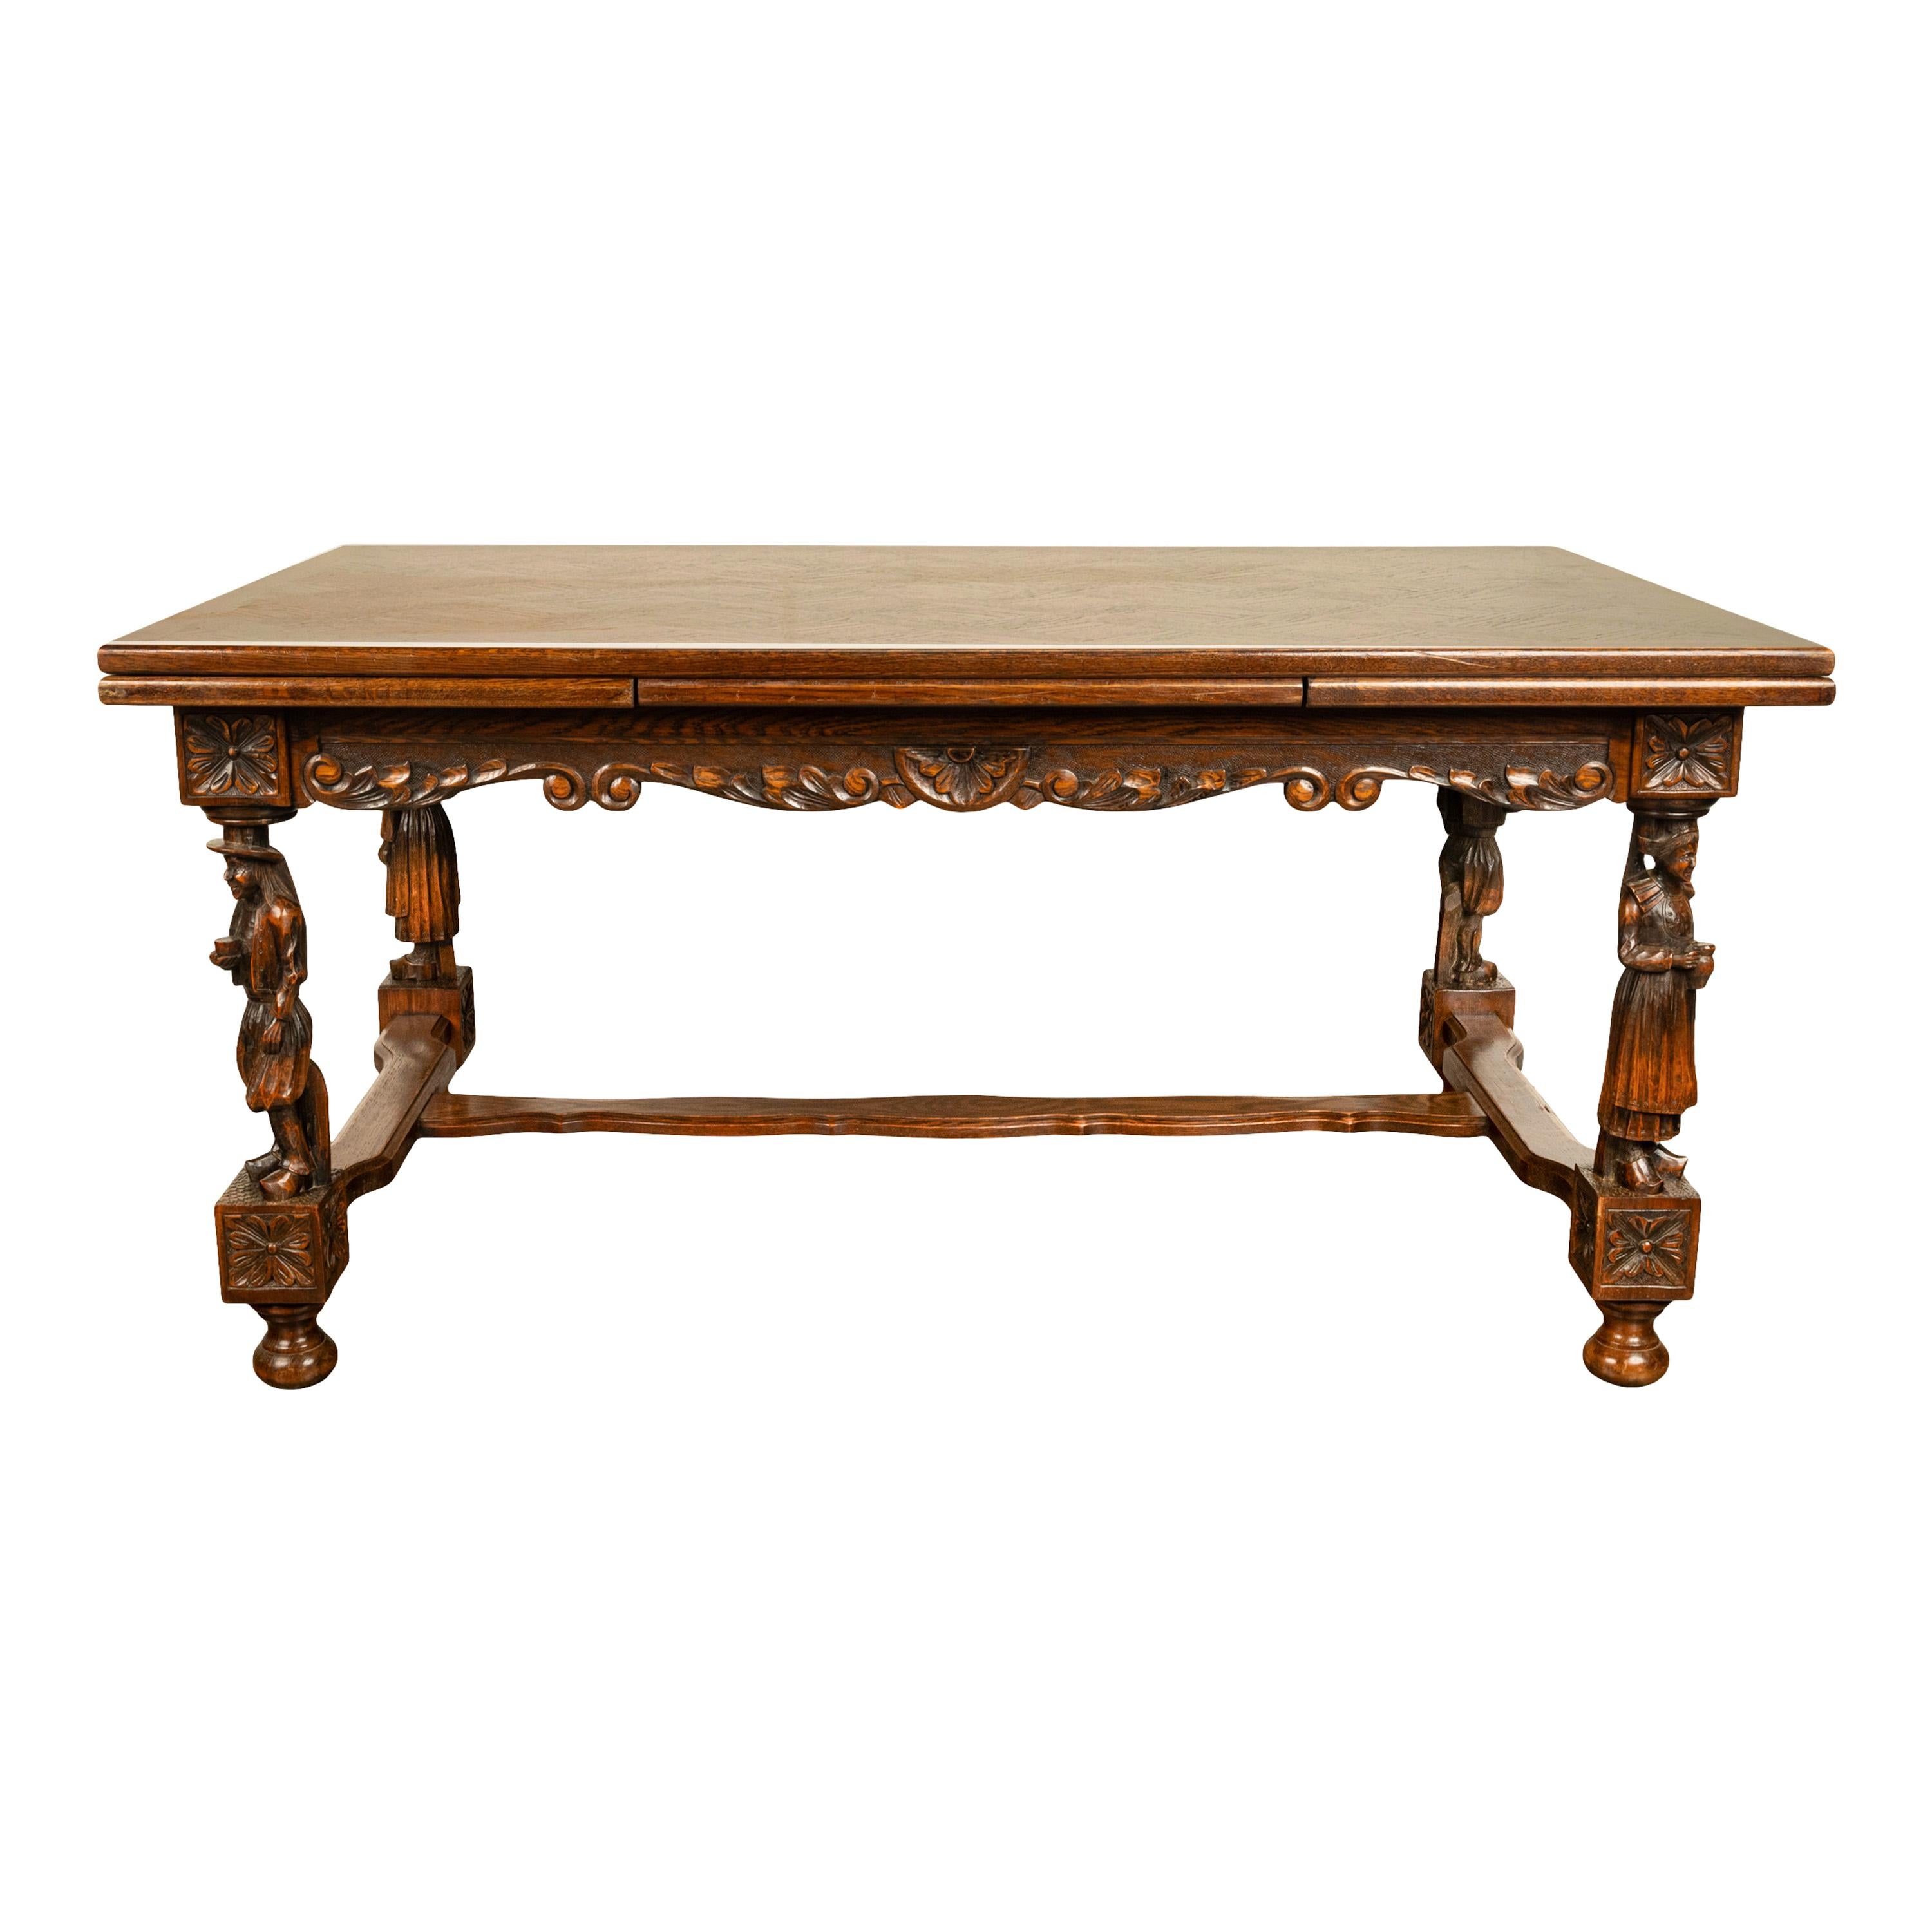 Antique Carved Figural French Breton Inlaid Dining Extending Table Brittany 1900 For Sale 6